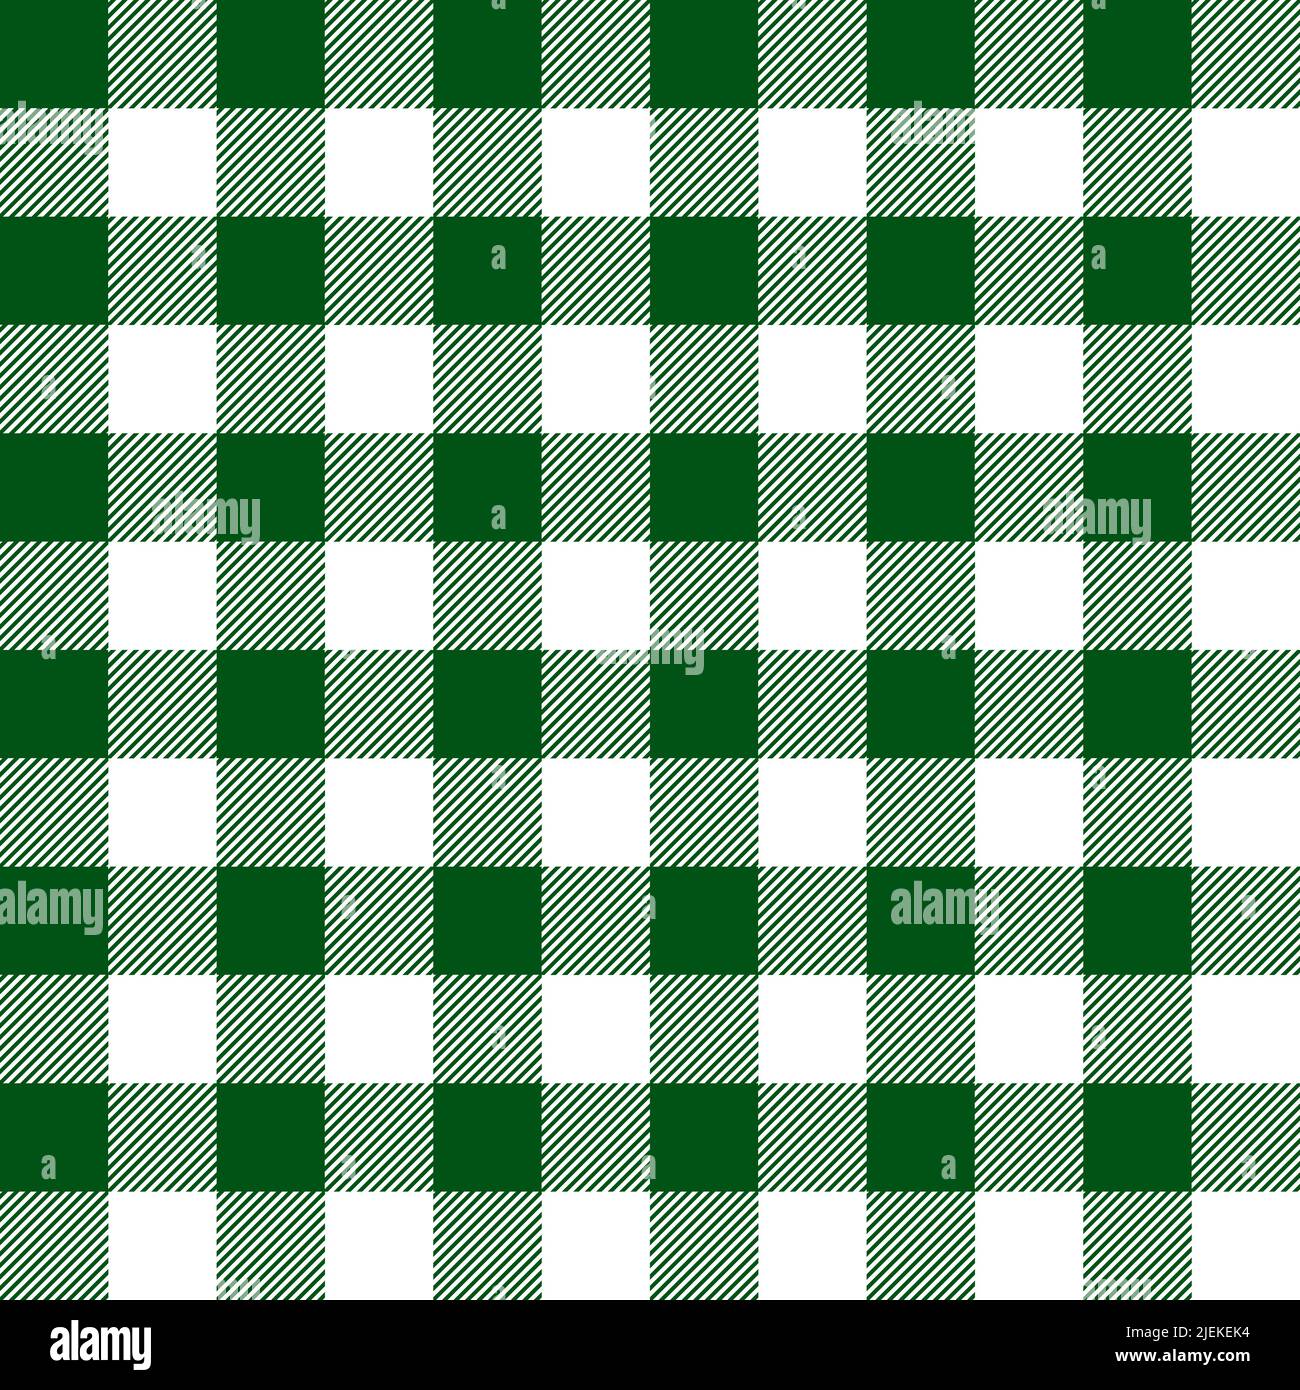 Plaid fabric textile green textured horizontal abstract background wallpaper backdrop pattern seamless vector illustration Stock Vector